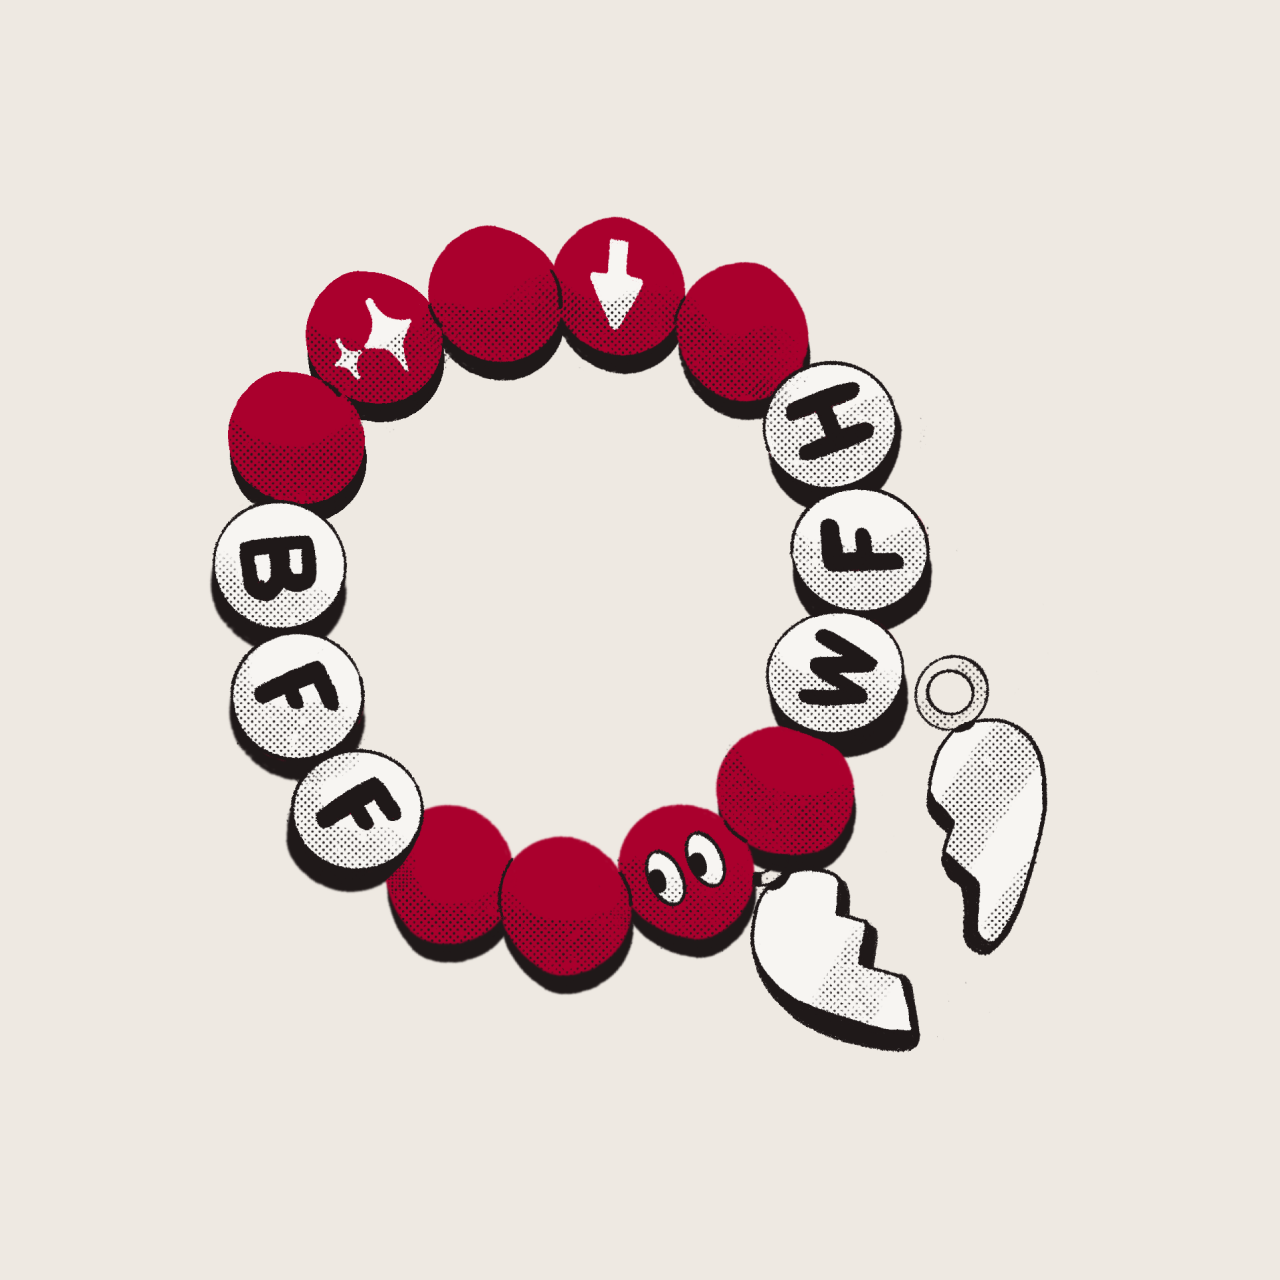 An illustration of a beaded friendship bracelet with the letters “BFF” and “WFH”